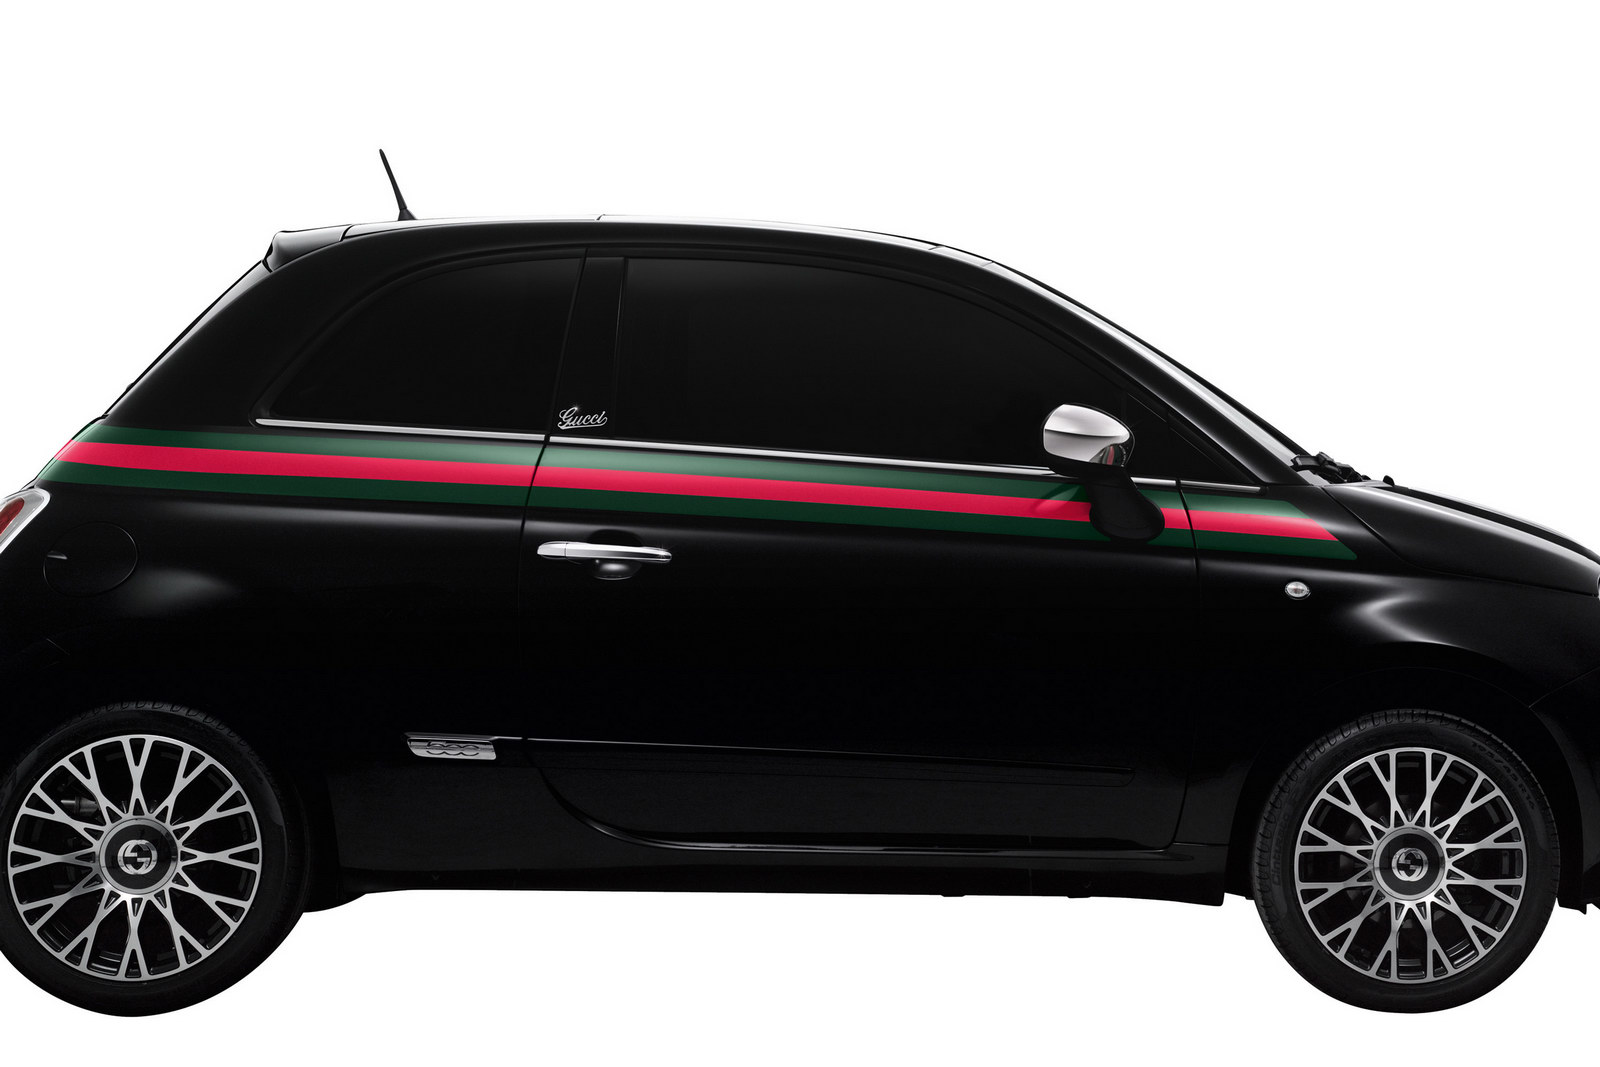 Fiat 500 by Gucci Makes Chic Debut at Italian Firm's Manhattan Store